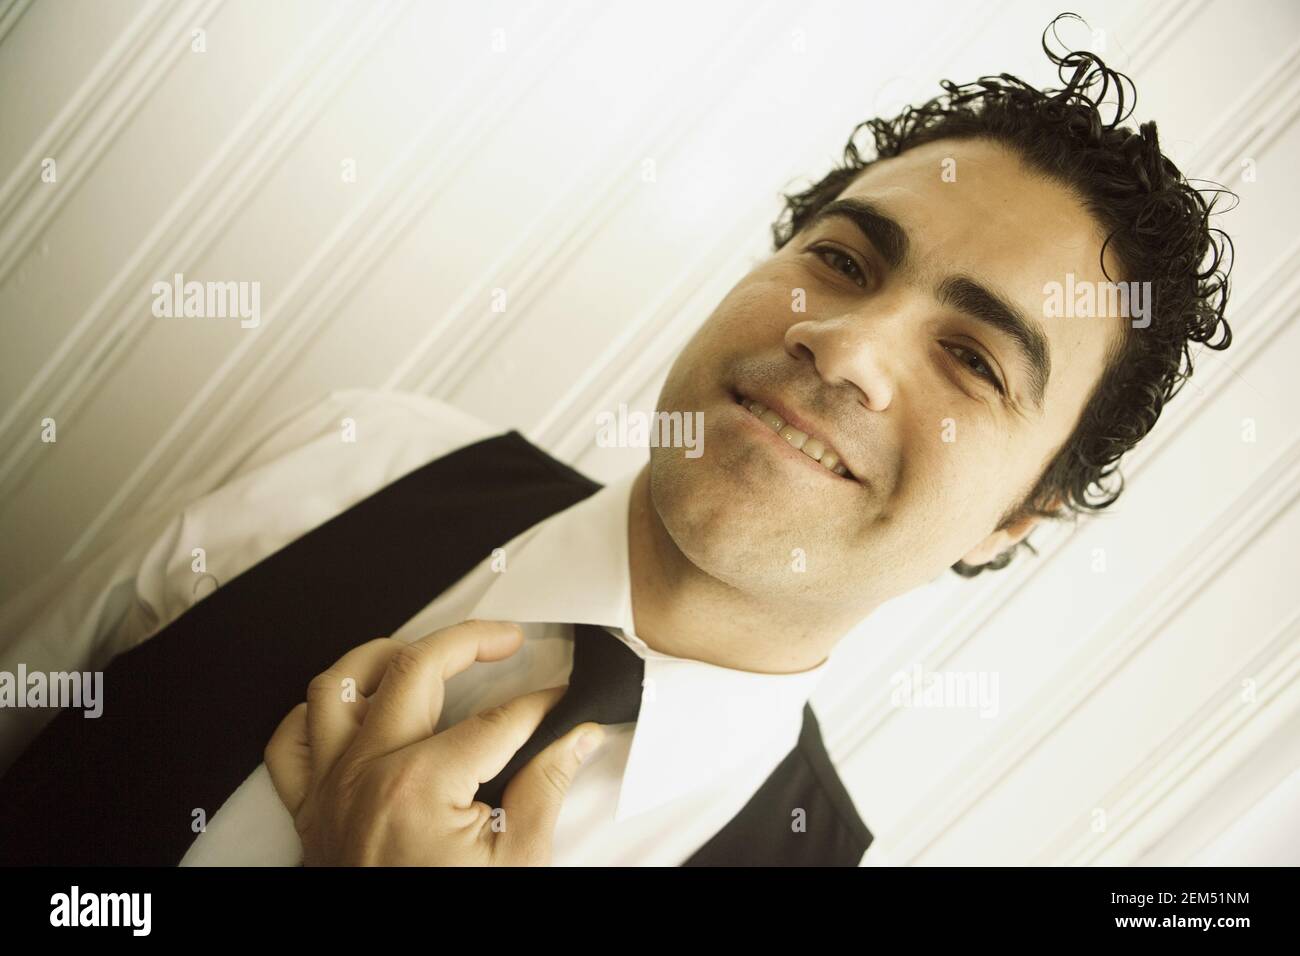 Portrait of a waiter adjusting his tie Stock Photo